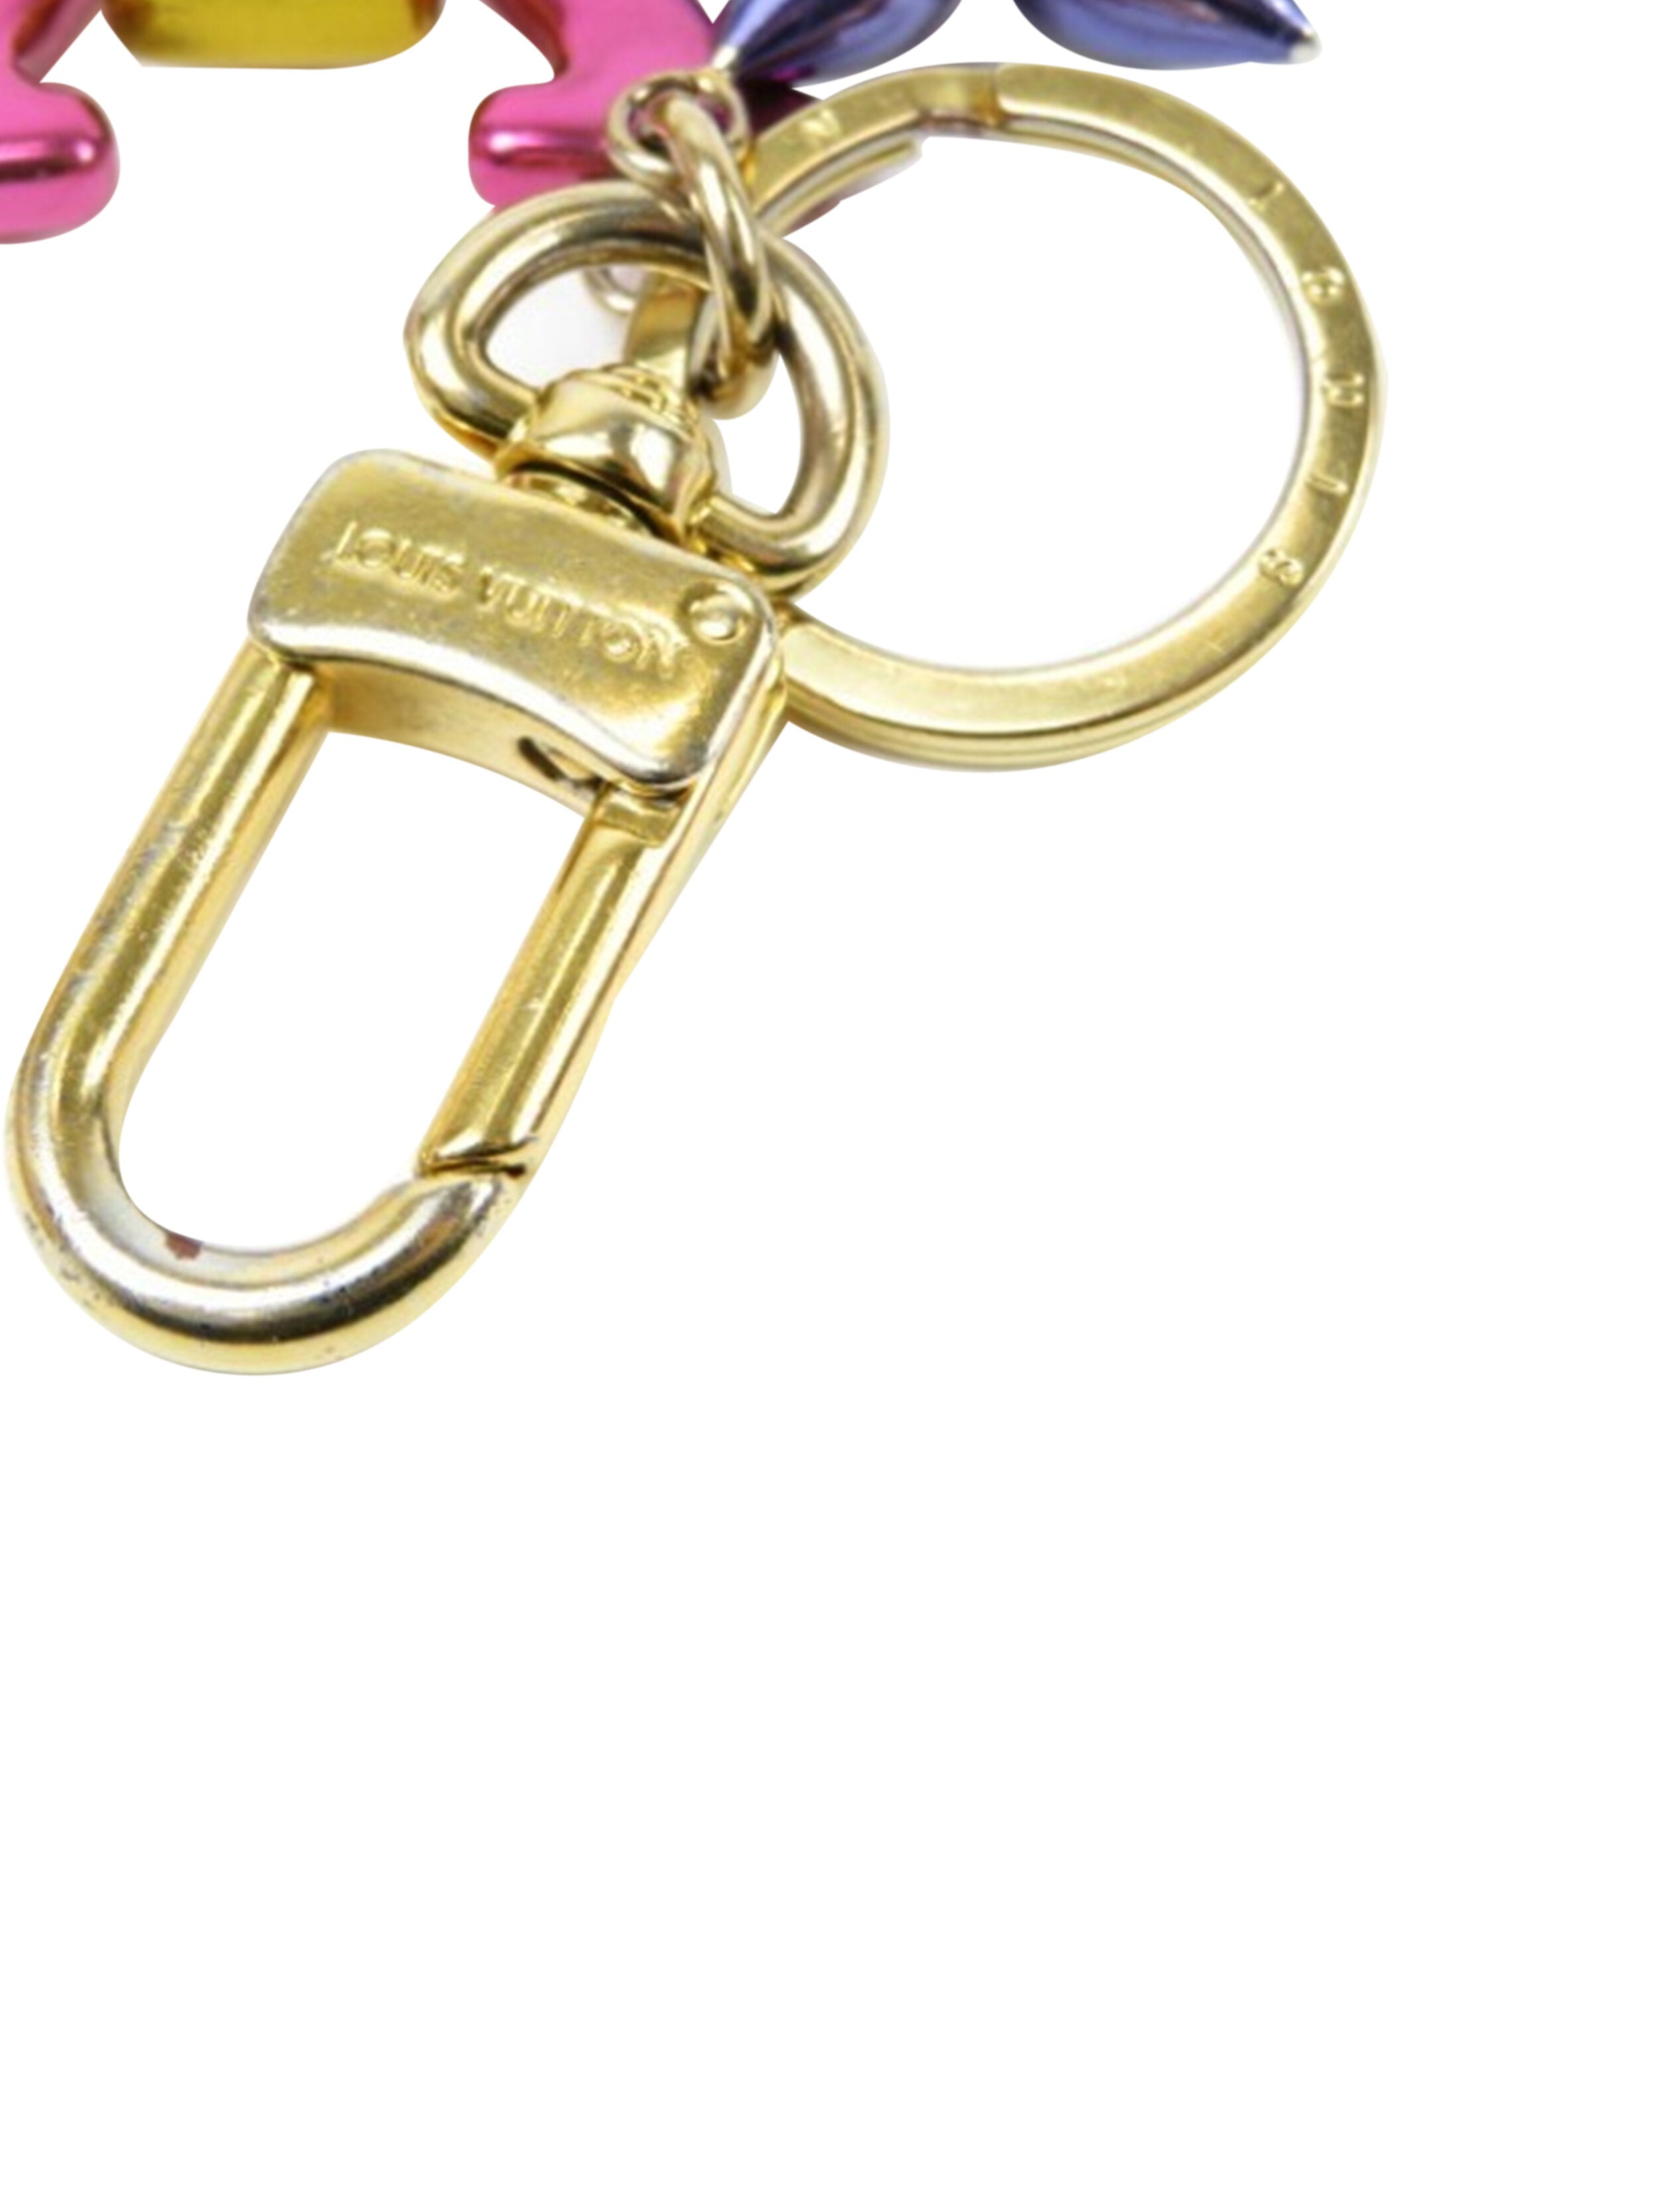 Louis Vuitton 2000s Gold and Burgundy Lock Charm Keychain · INTO